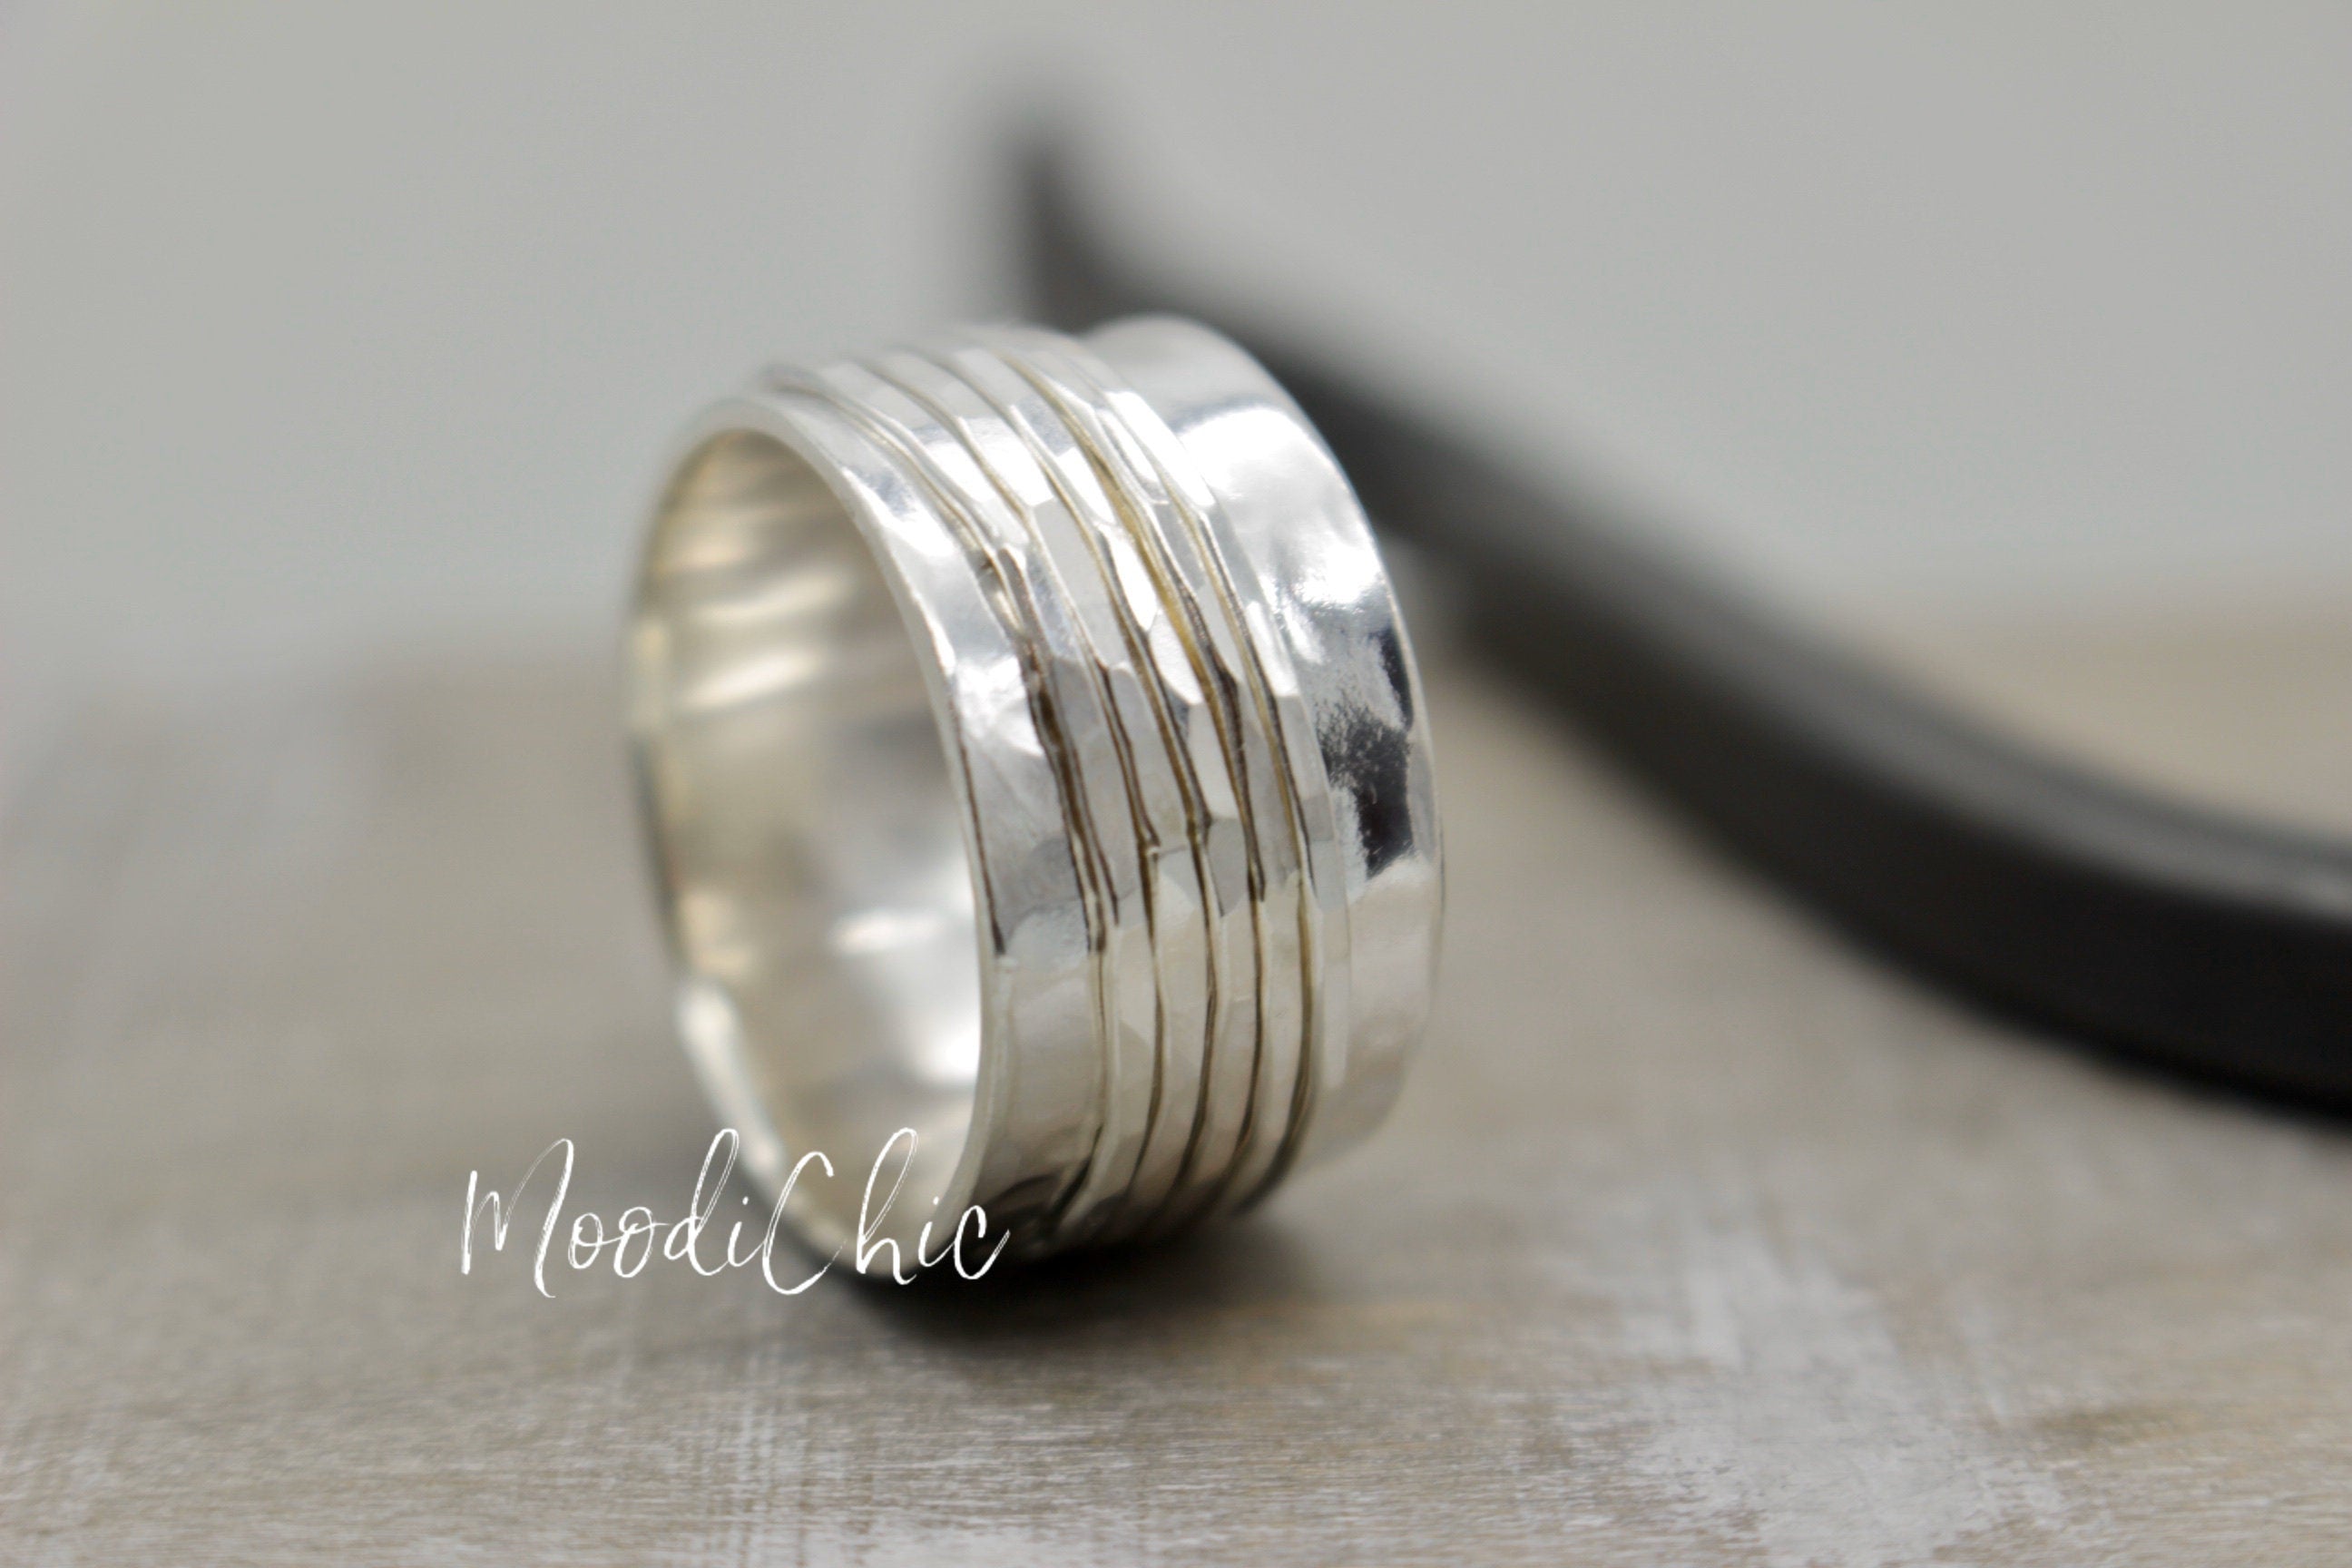 Sterling silver spinner ring - silver statement ring - sterling silver fidget ring - womans jewelry